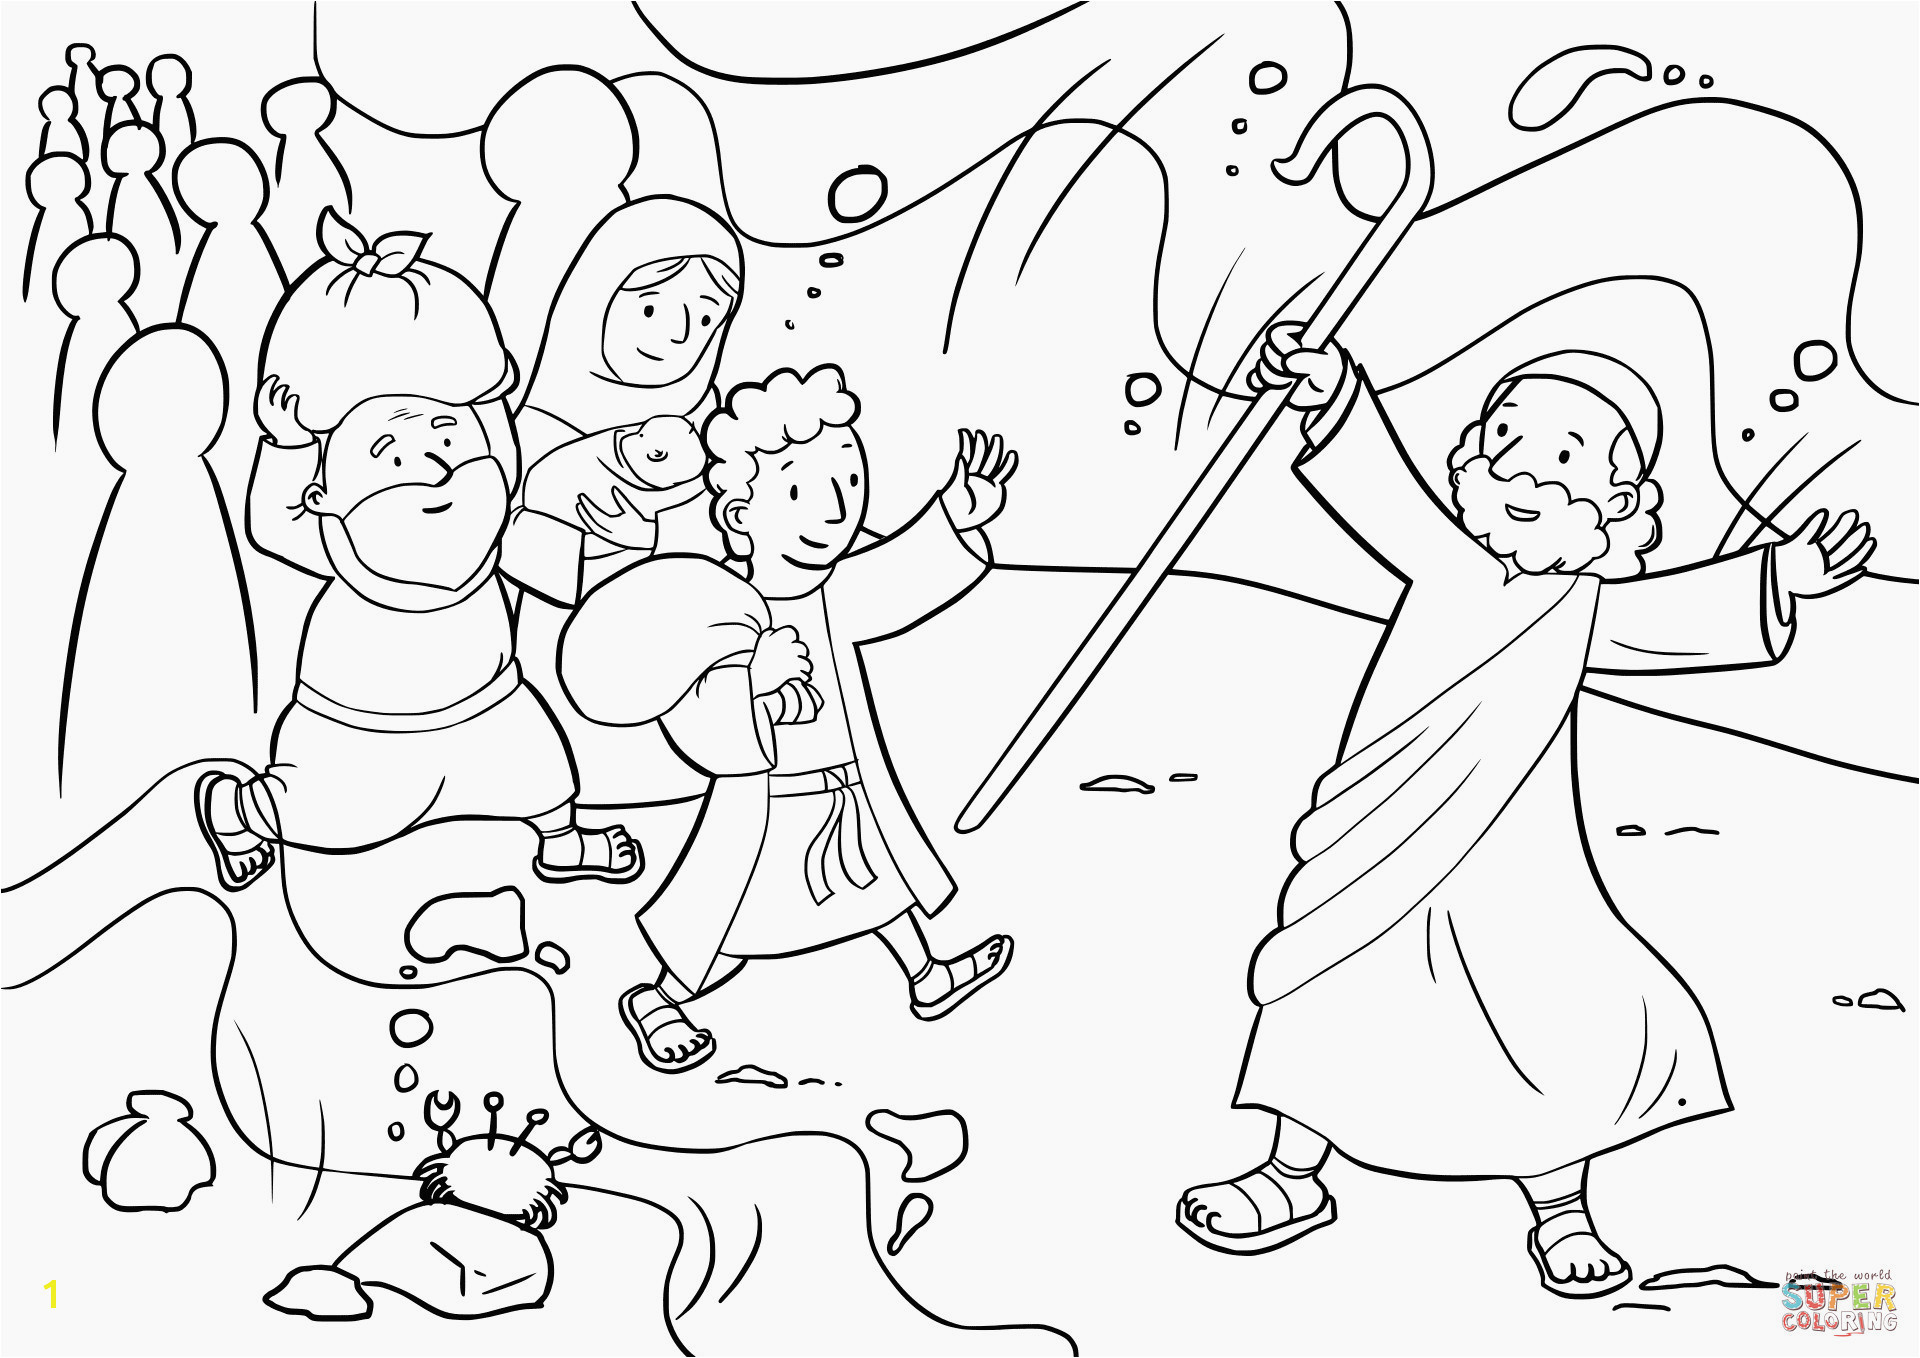 Moses Parting the Red Sea Coloring Page Printable Coloring Pages Moses Parting the Red Sea